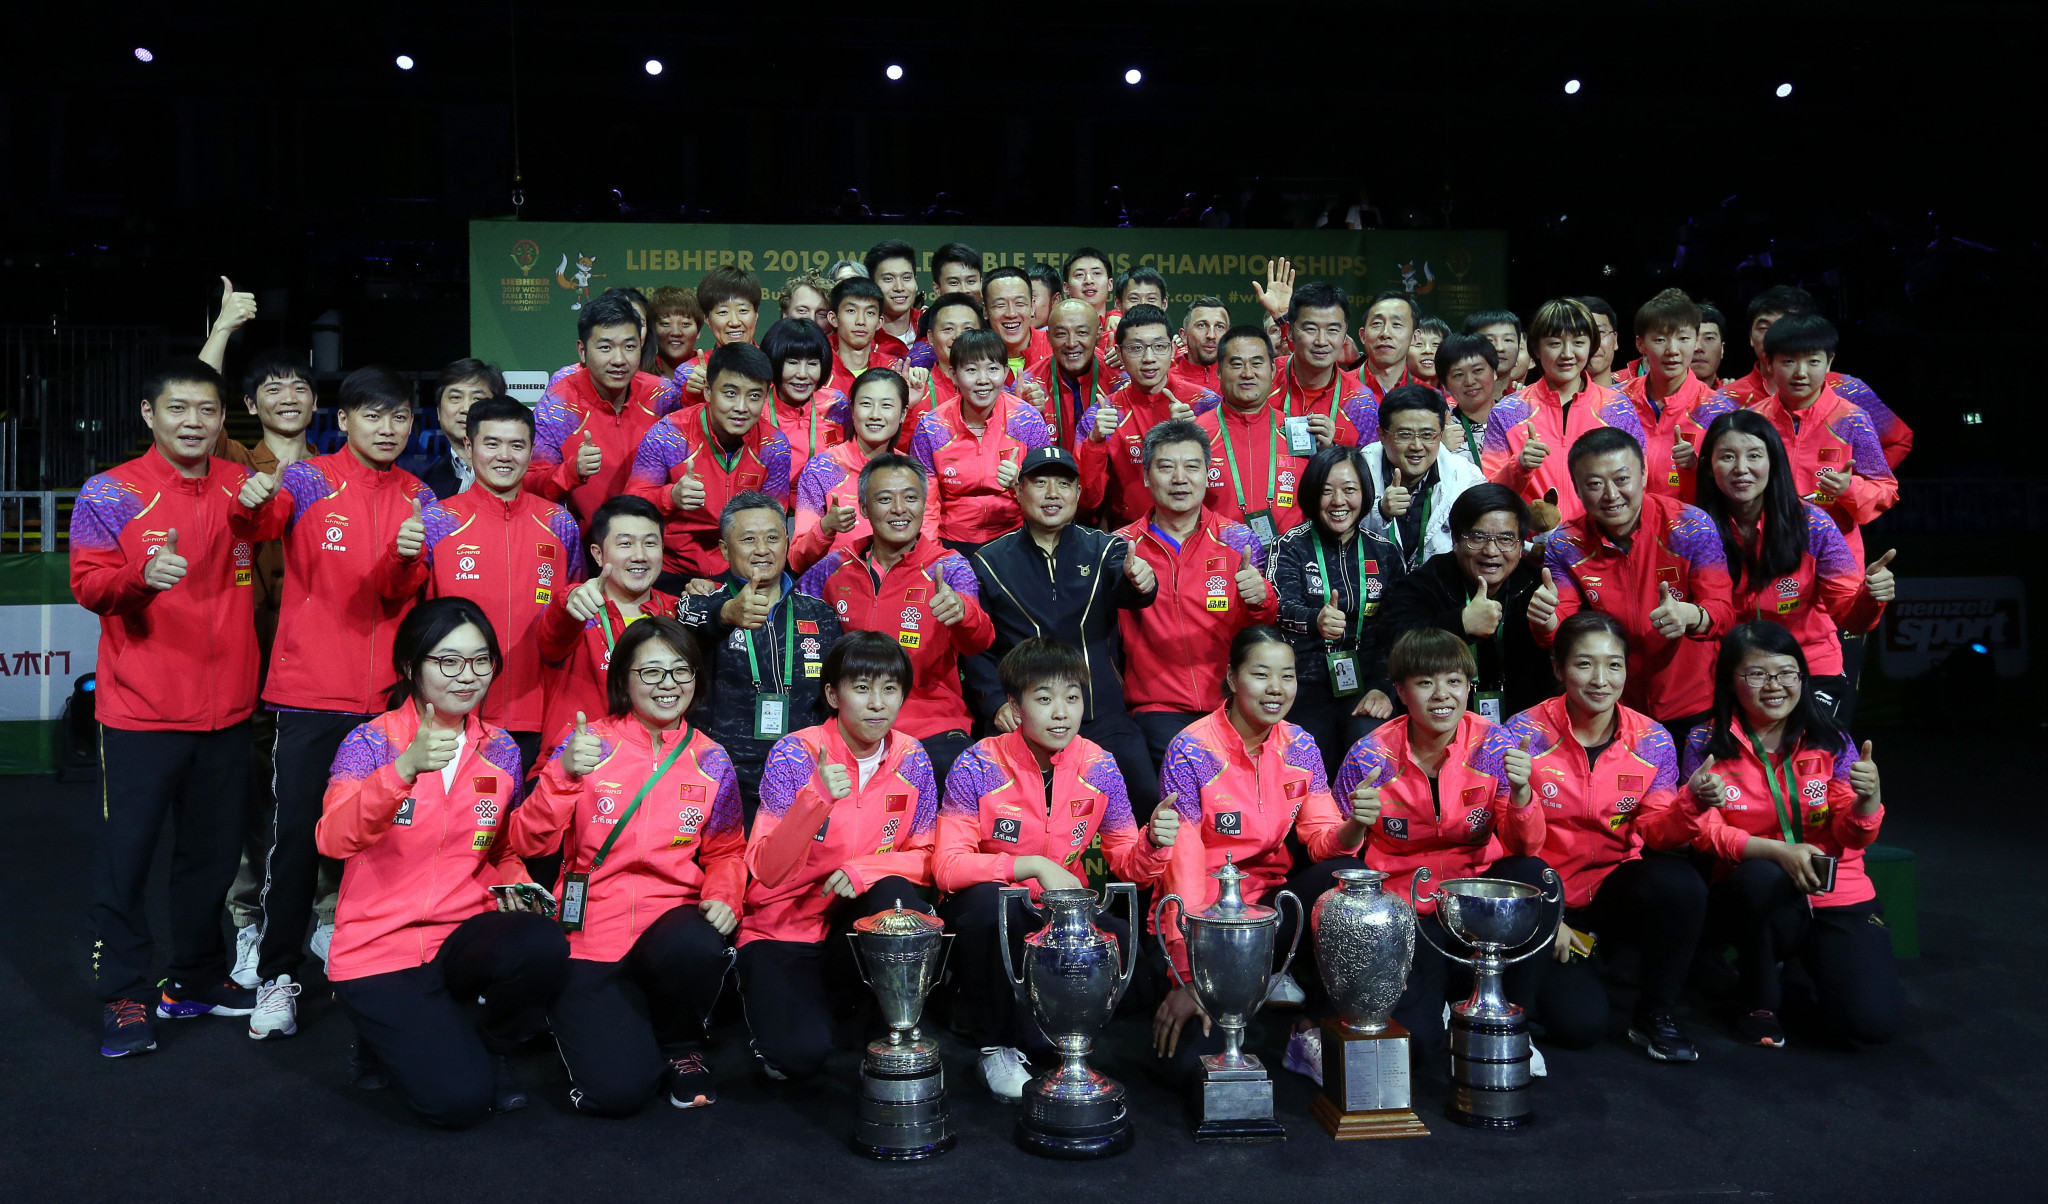 ITTF announce new dates of World Team Table Tennis Championships